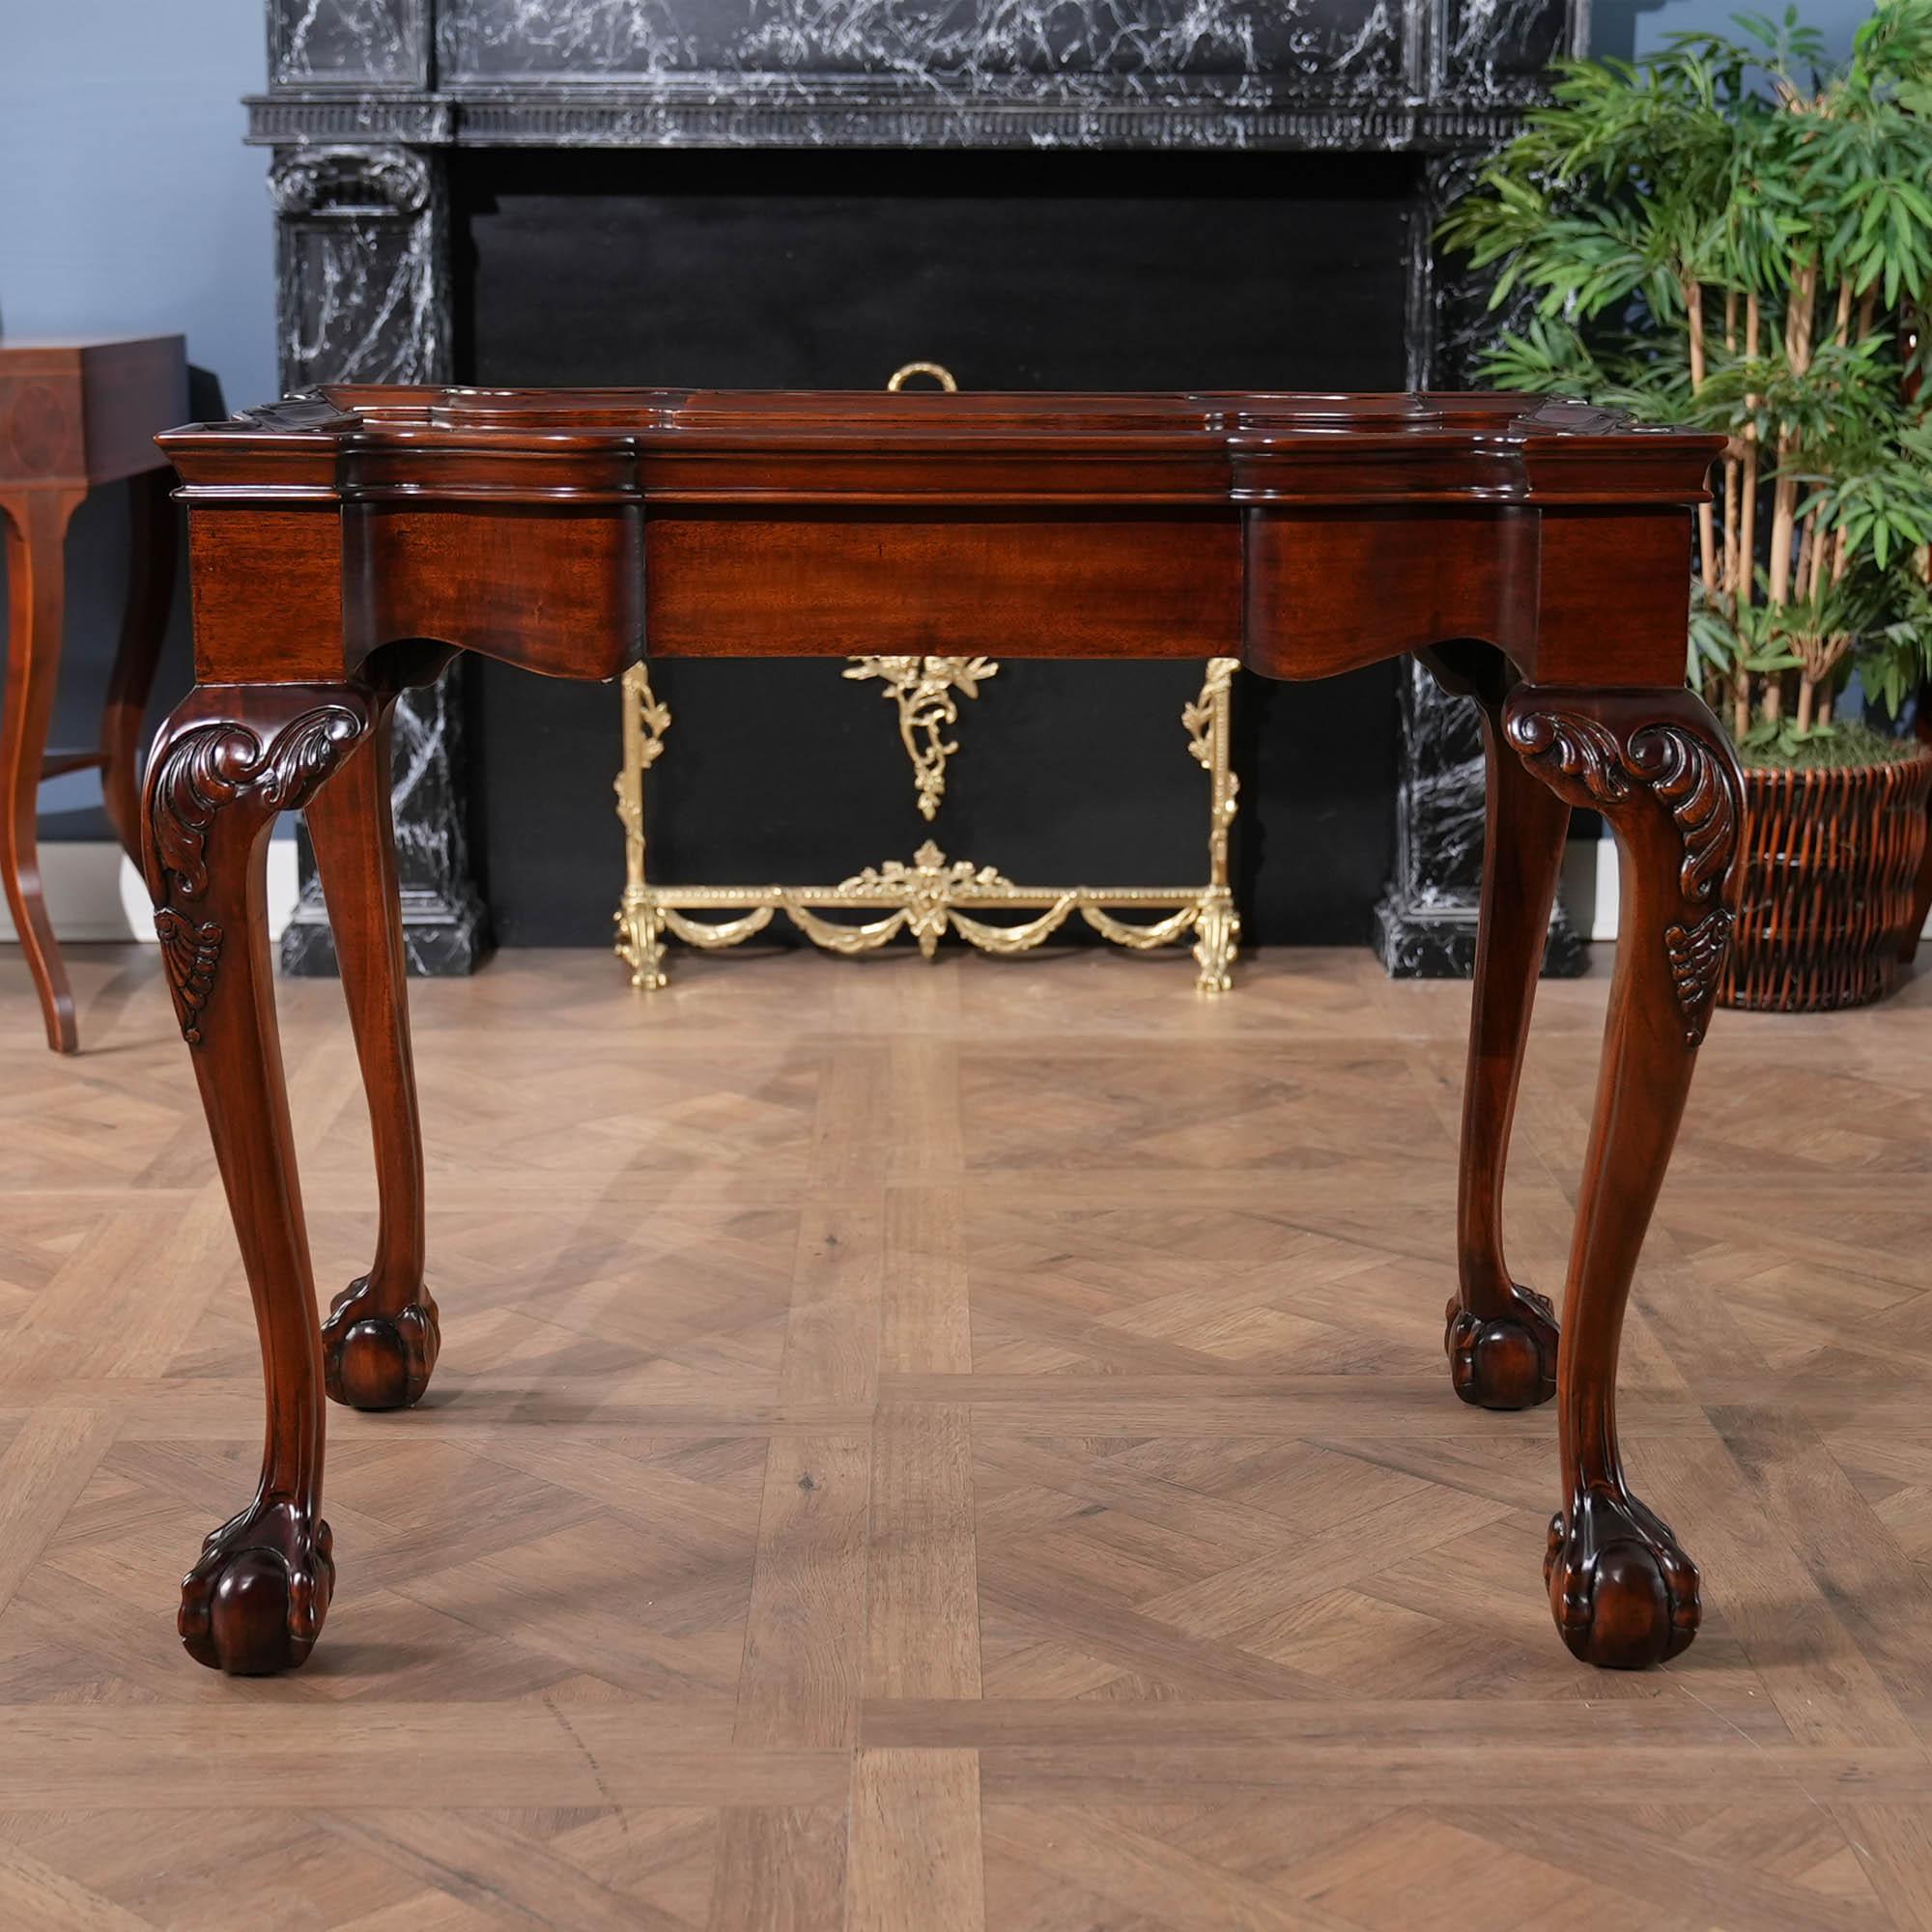 Designed after an 18th Century New England style Tea table this high quality antique reproduction has fantastic hand carved details all the way from the molding along the top of the table down to the generous sized hand carved ball and claw style